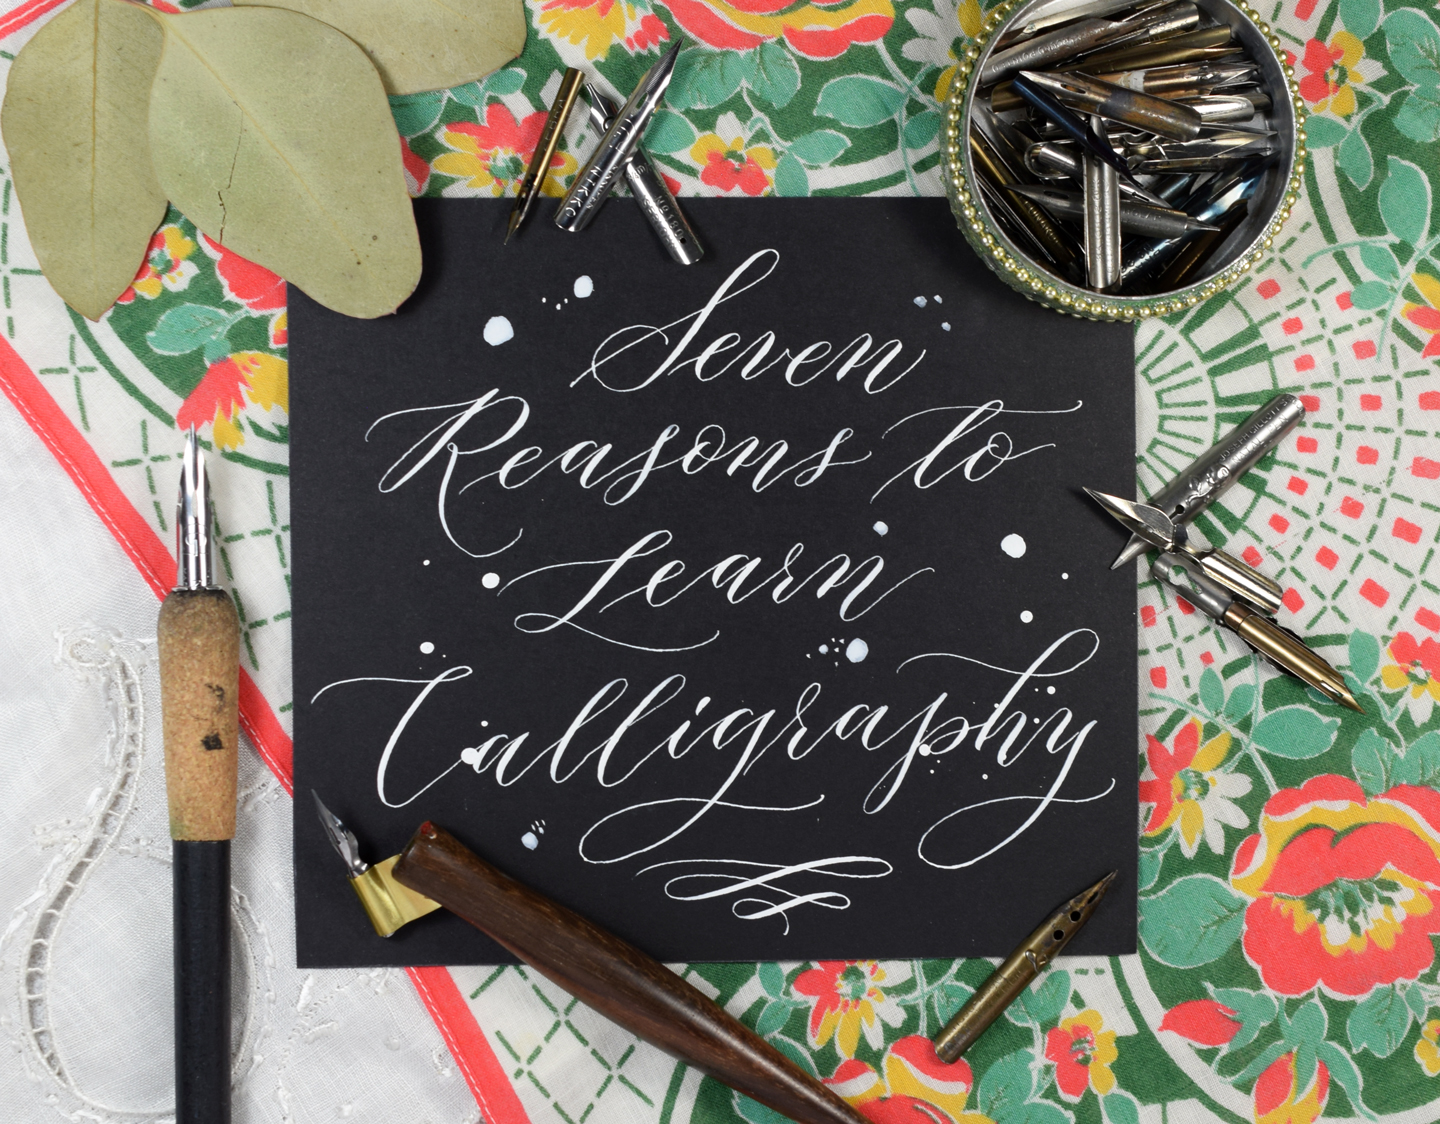 Seven Reasons to Learn Calligraphy